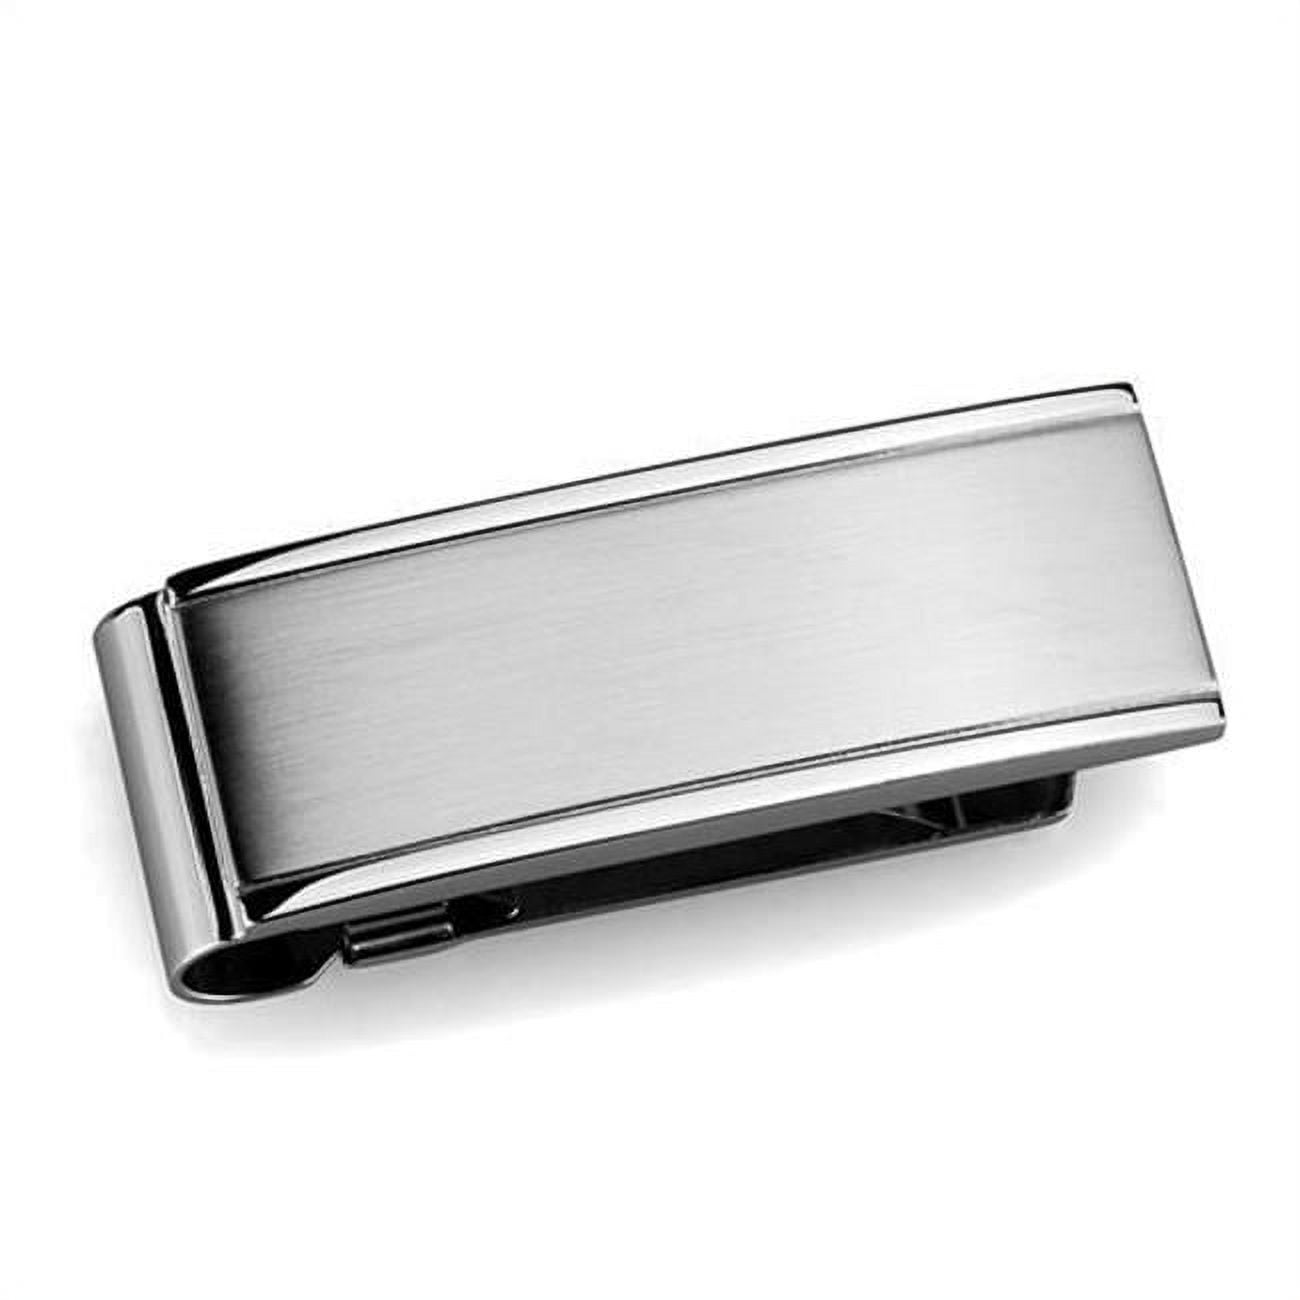 Picture of Alamode TK2070 Men High Polished Stainless Steel Money Clip with No Stone in No Stone